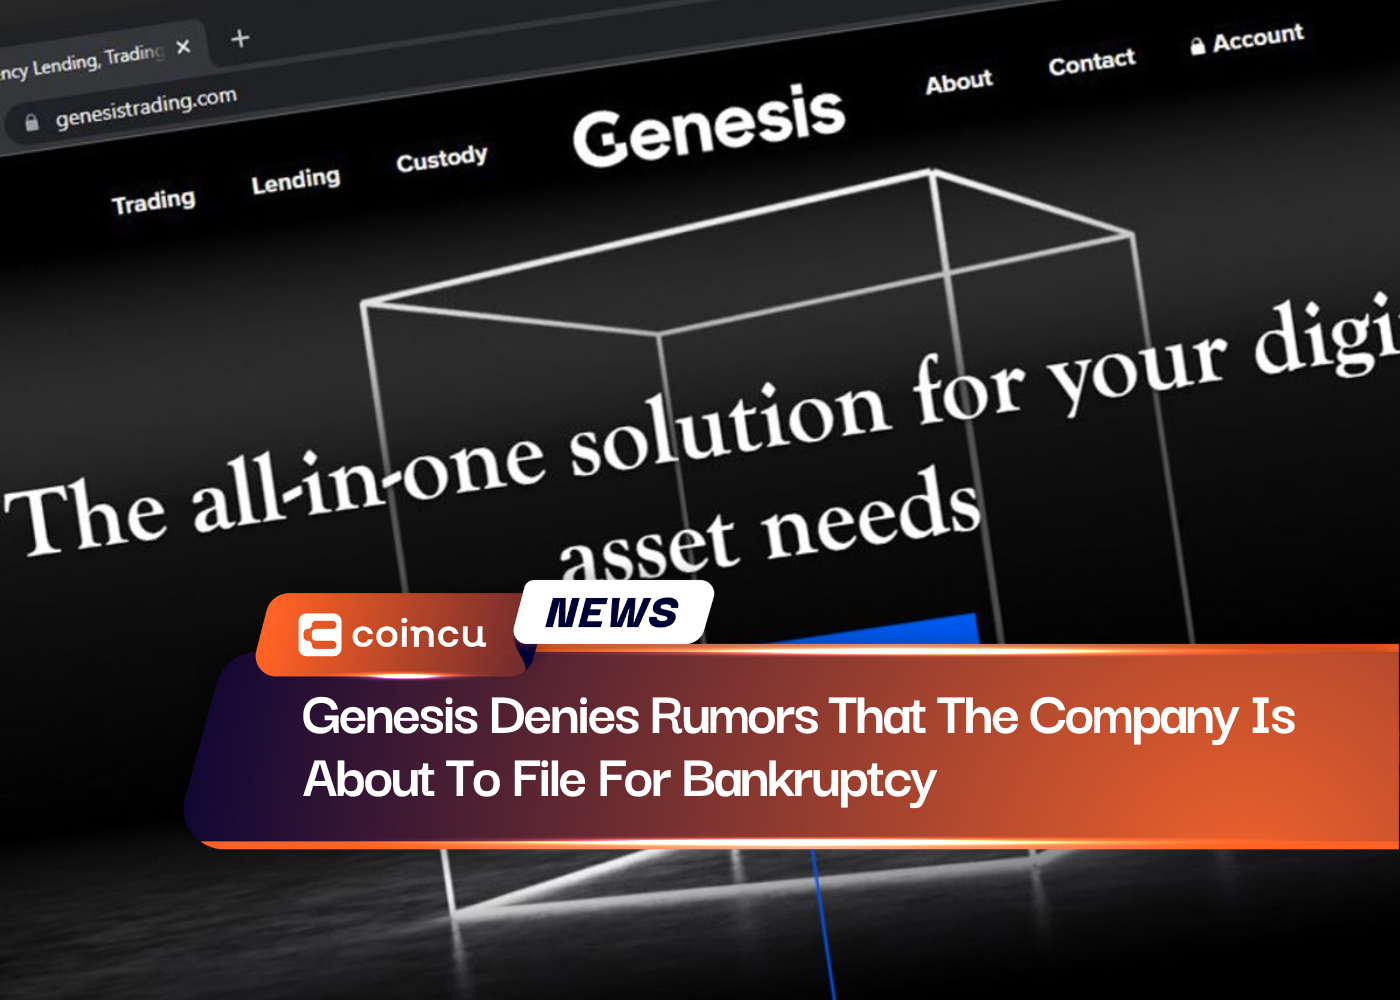 Genesis Denies Rumors That The Company Is About To File For Bankruptcy